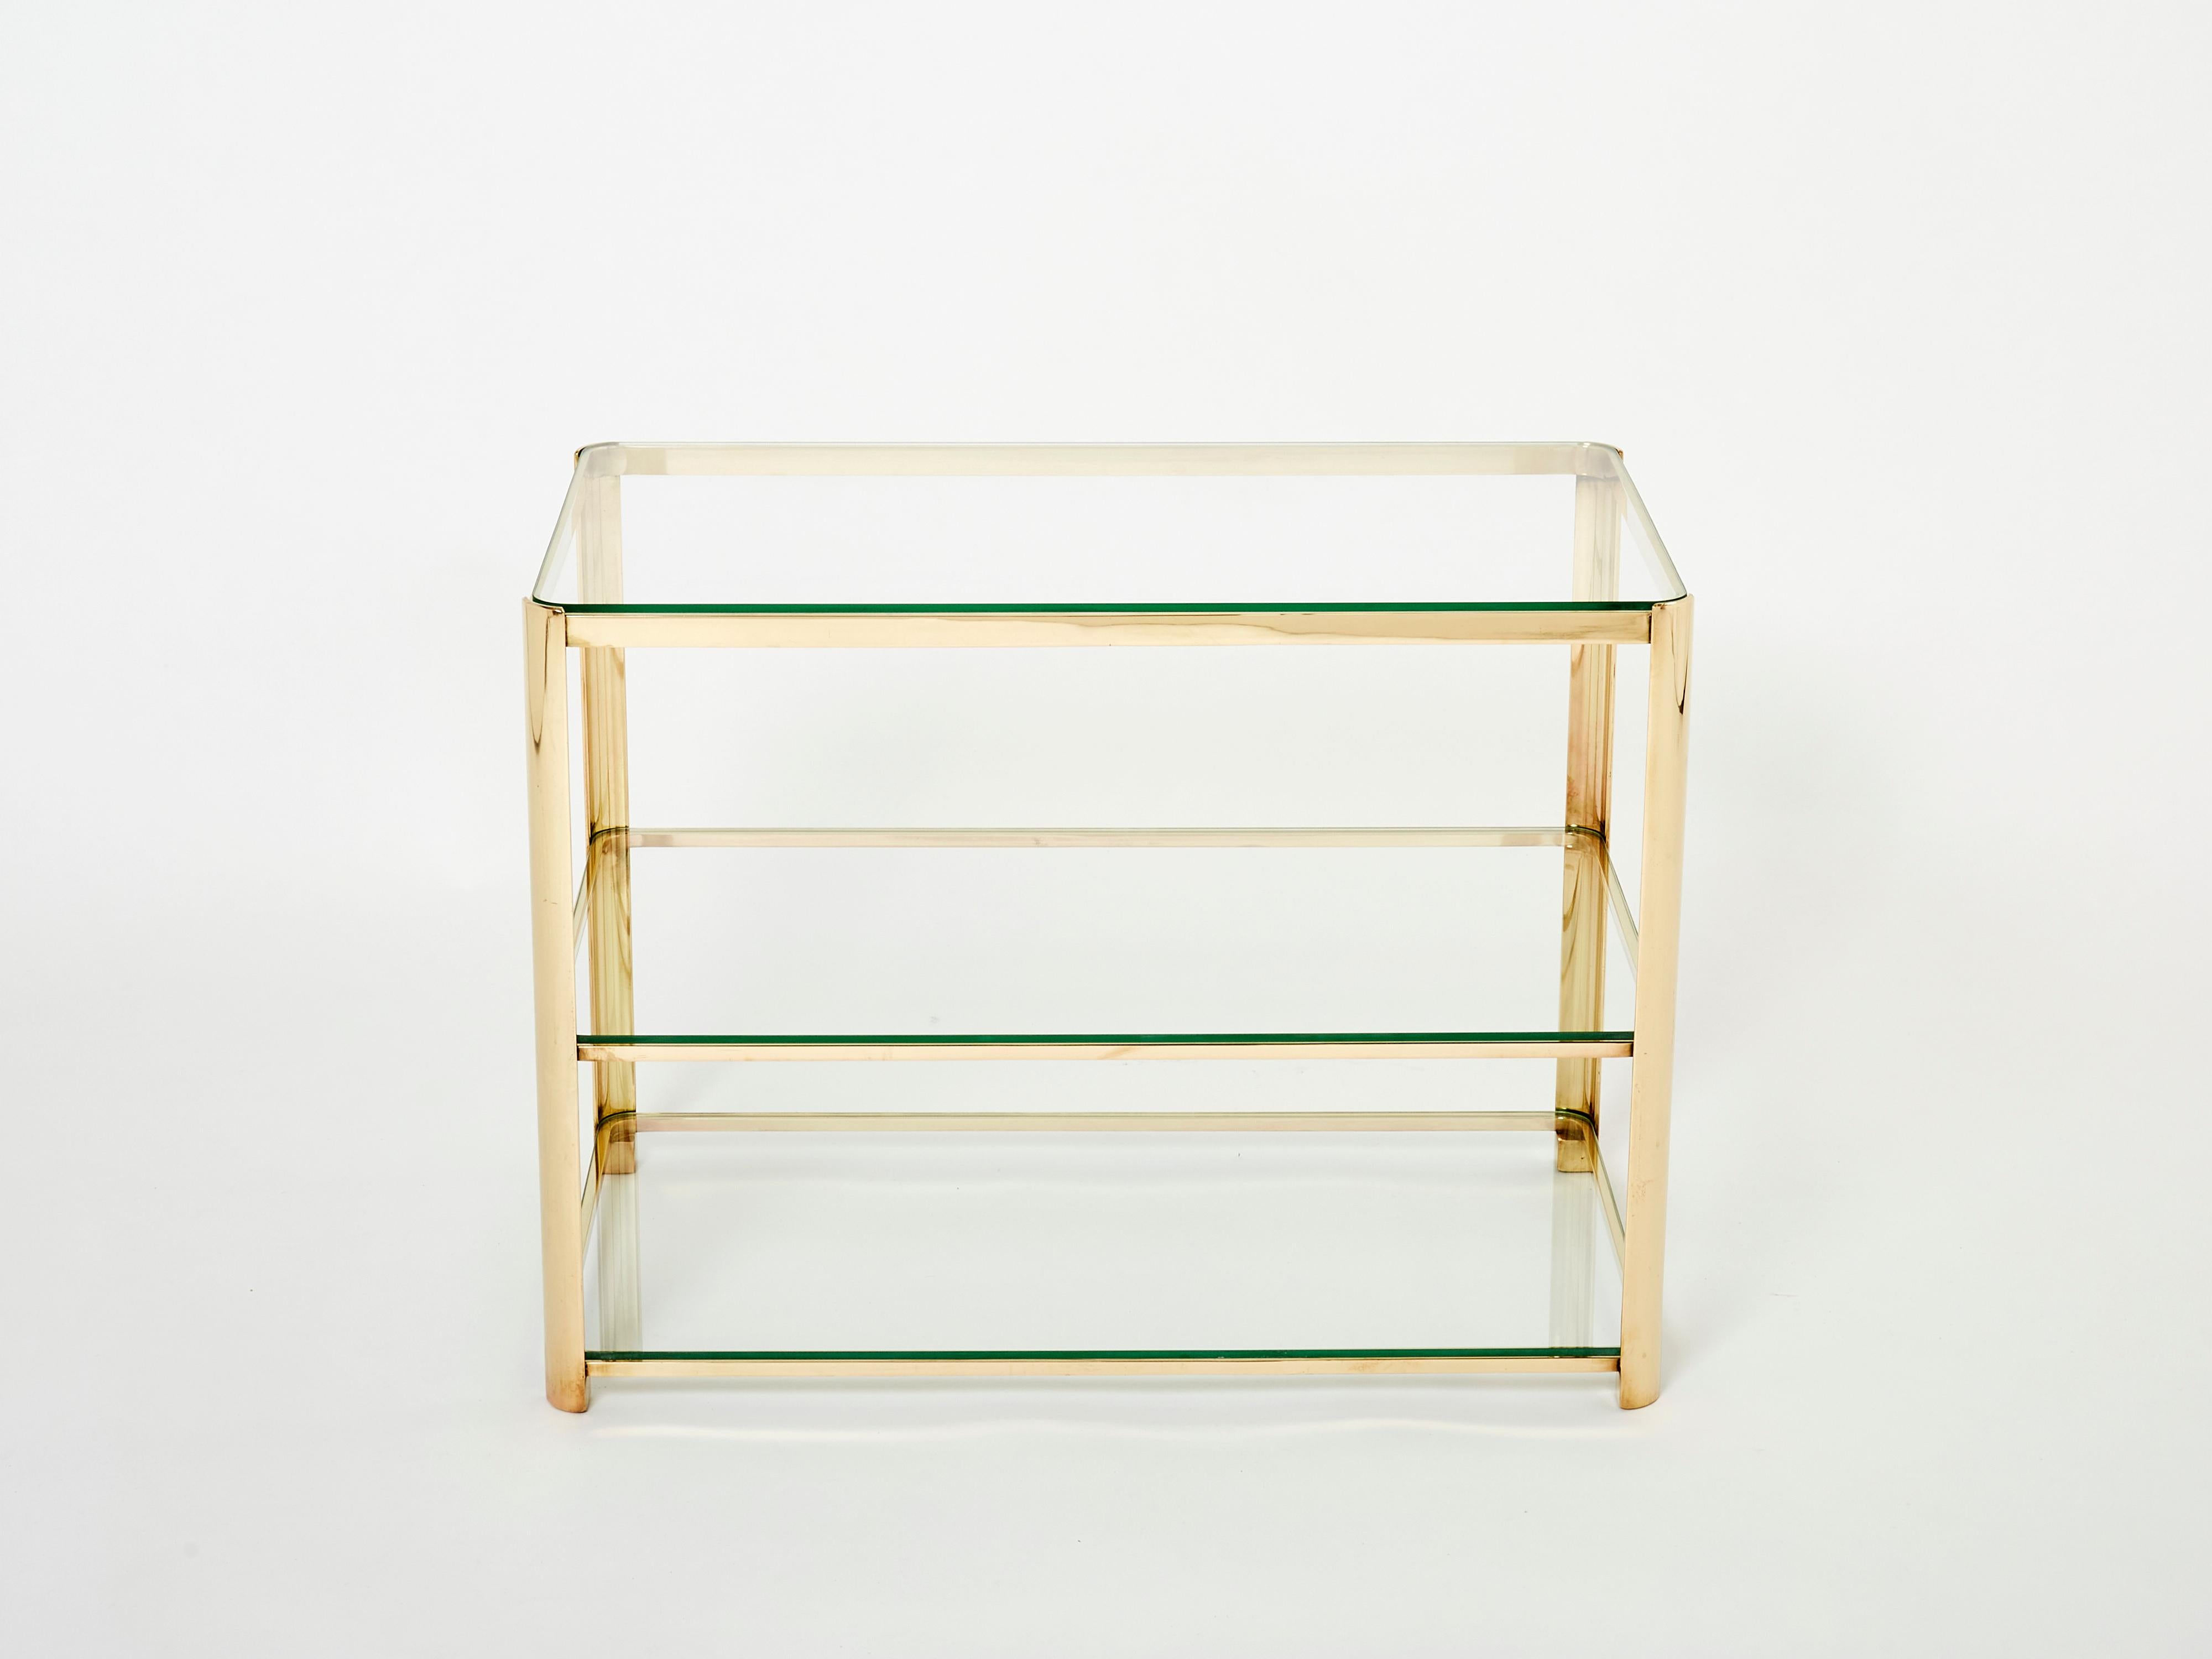 This beautiful three-tier side table designed by Jacques Quinet and stamped by Broncz, is a remarkable find. The table features a strong, solid polished bronze structure built to last forever. The original three-tier glass tops add a nice aesthetic